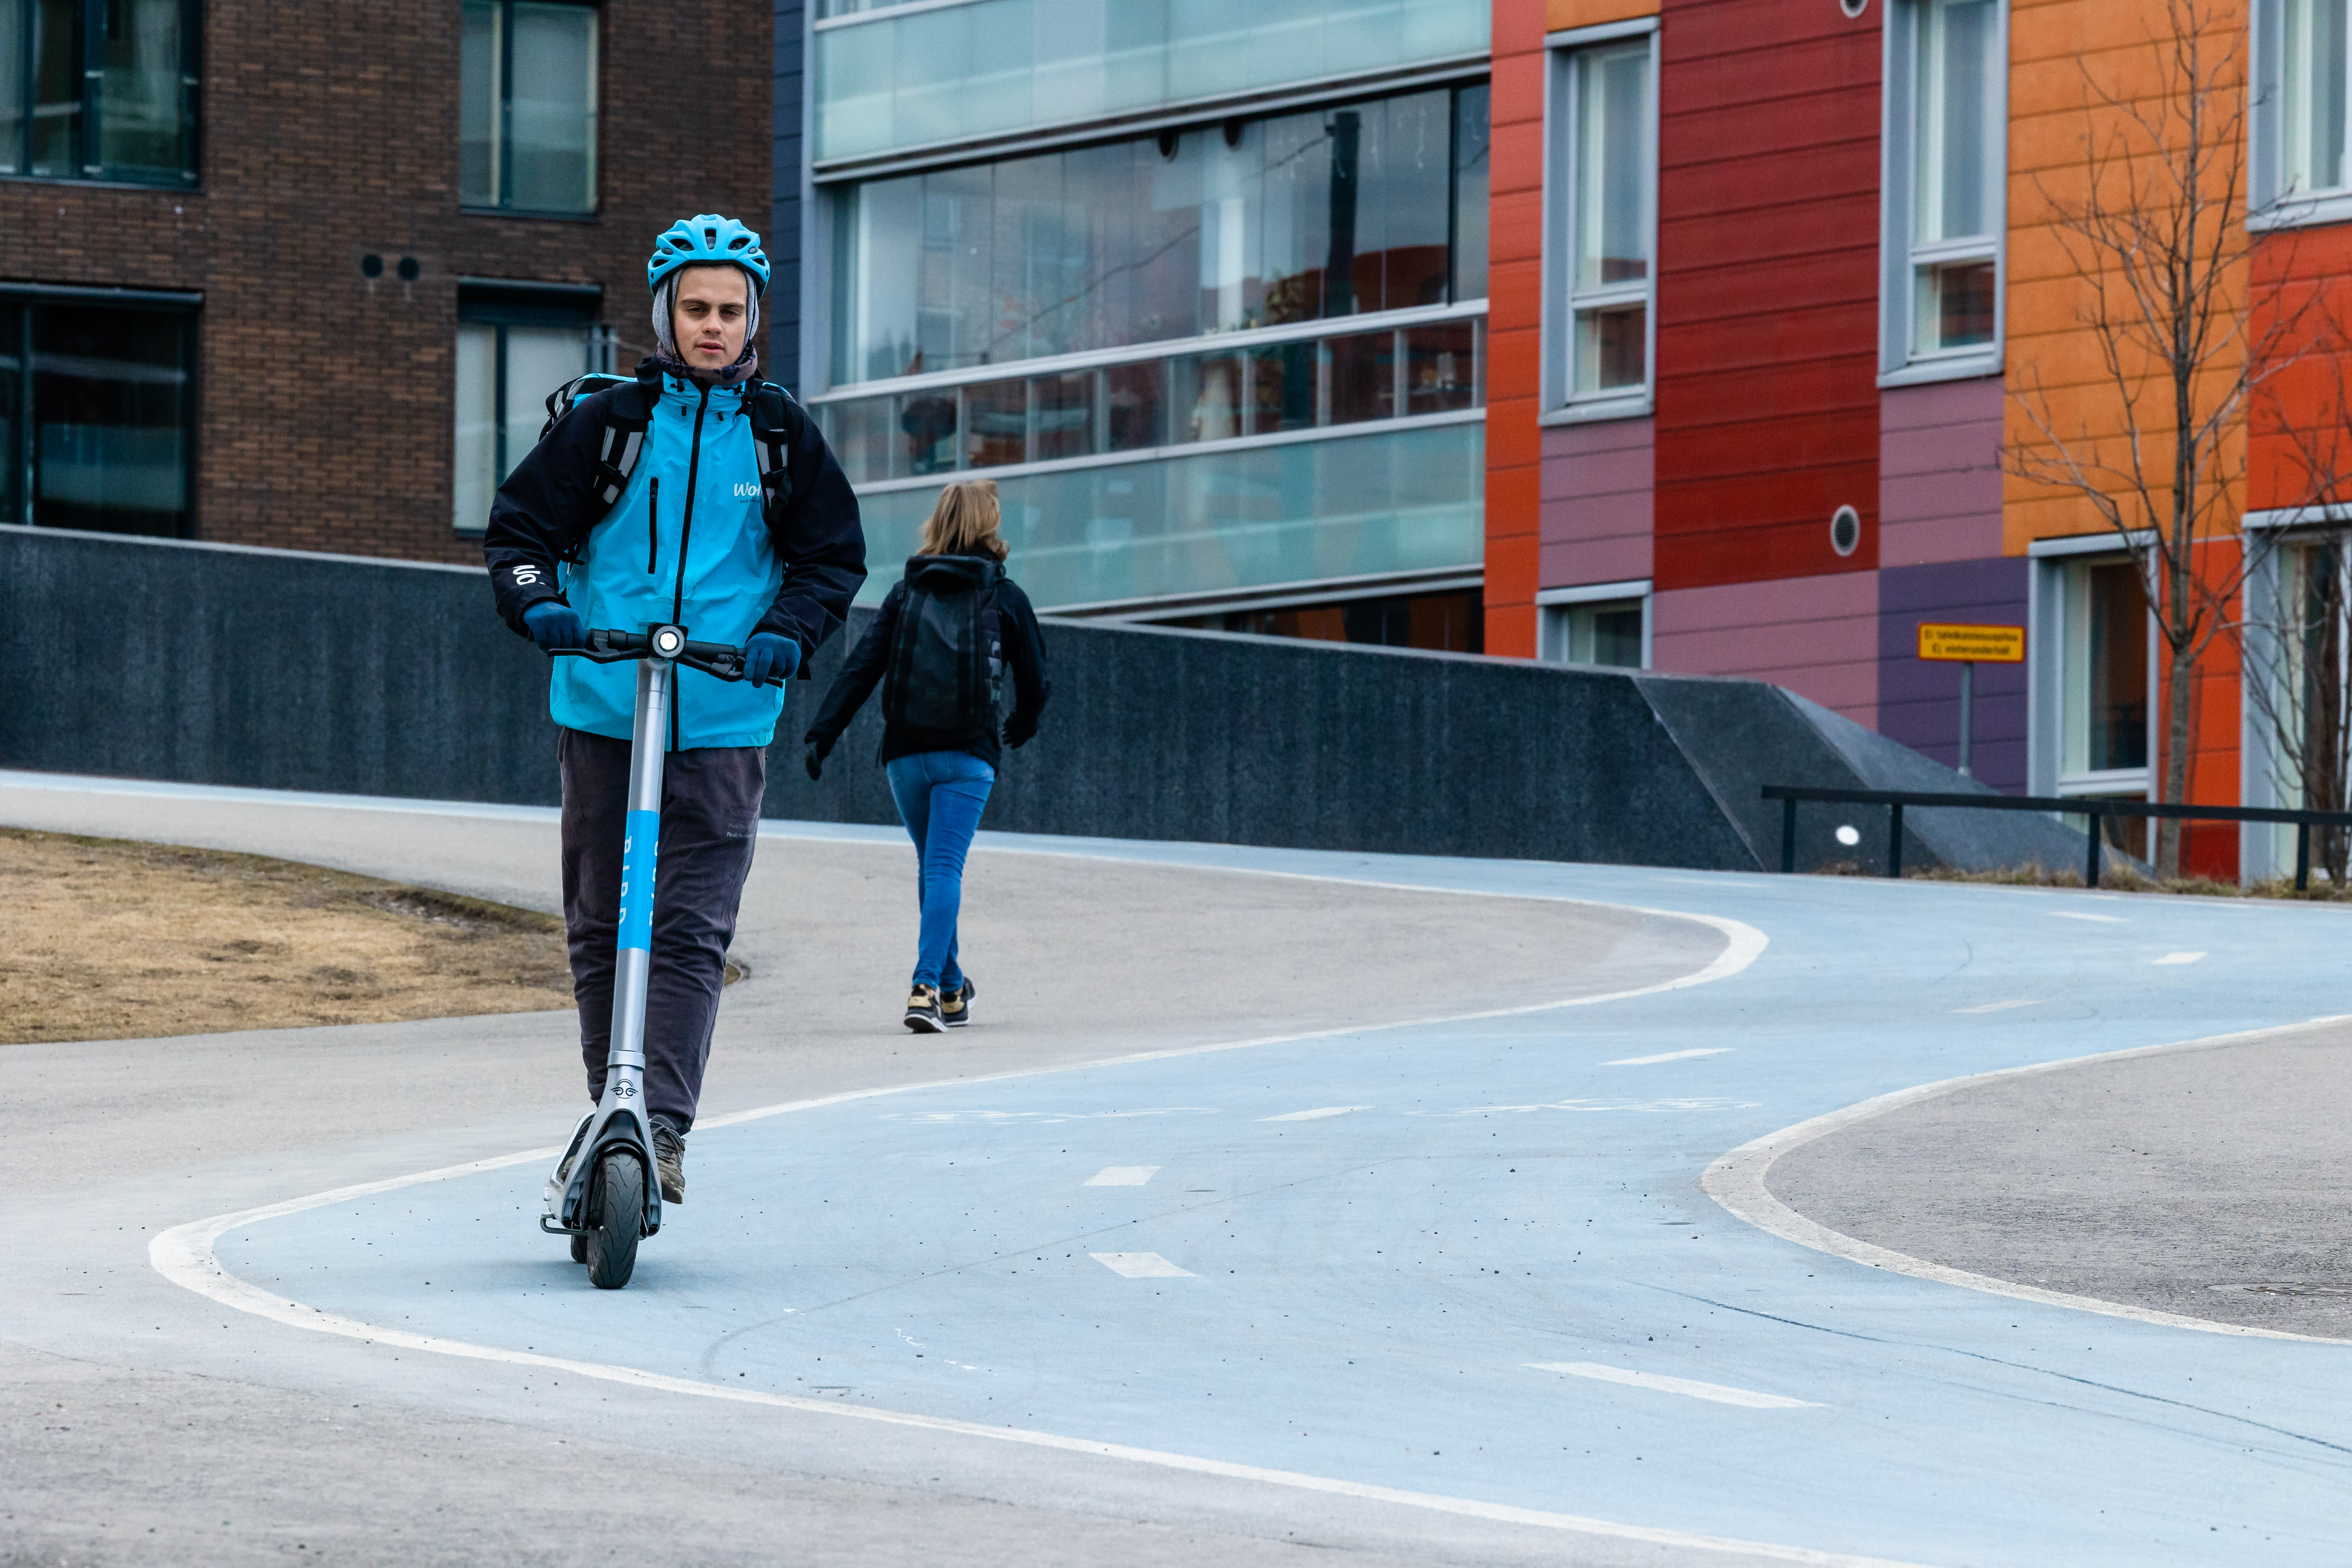 E-scooters are more popular than taxis, but walking still prevails in Helsinki